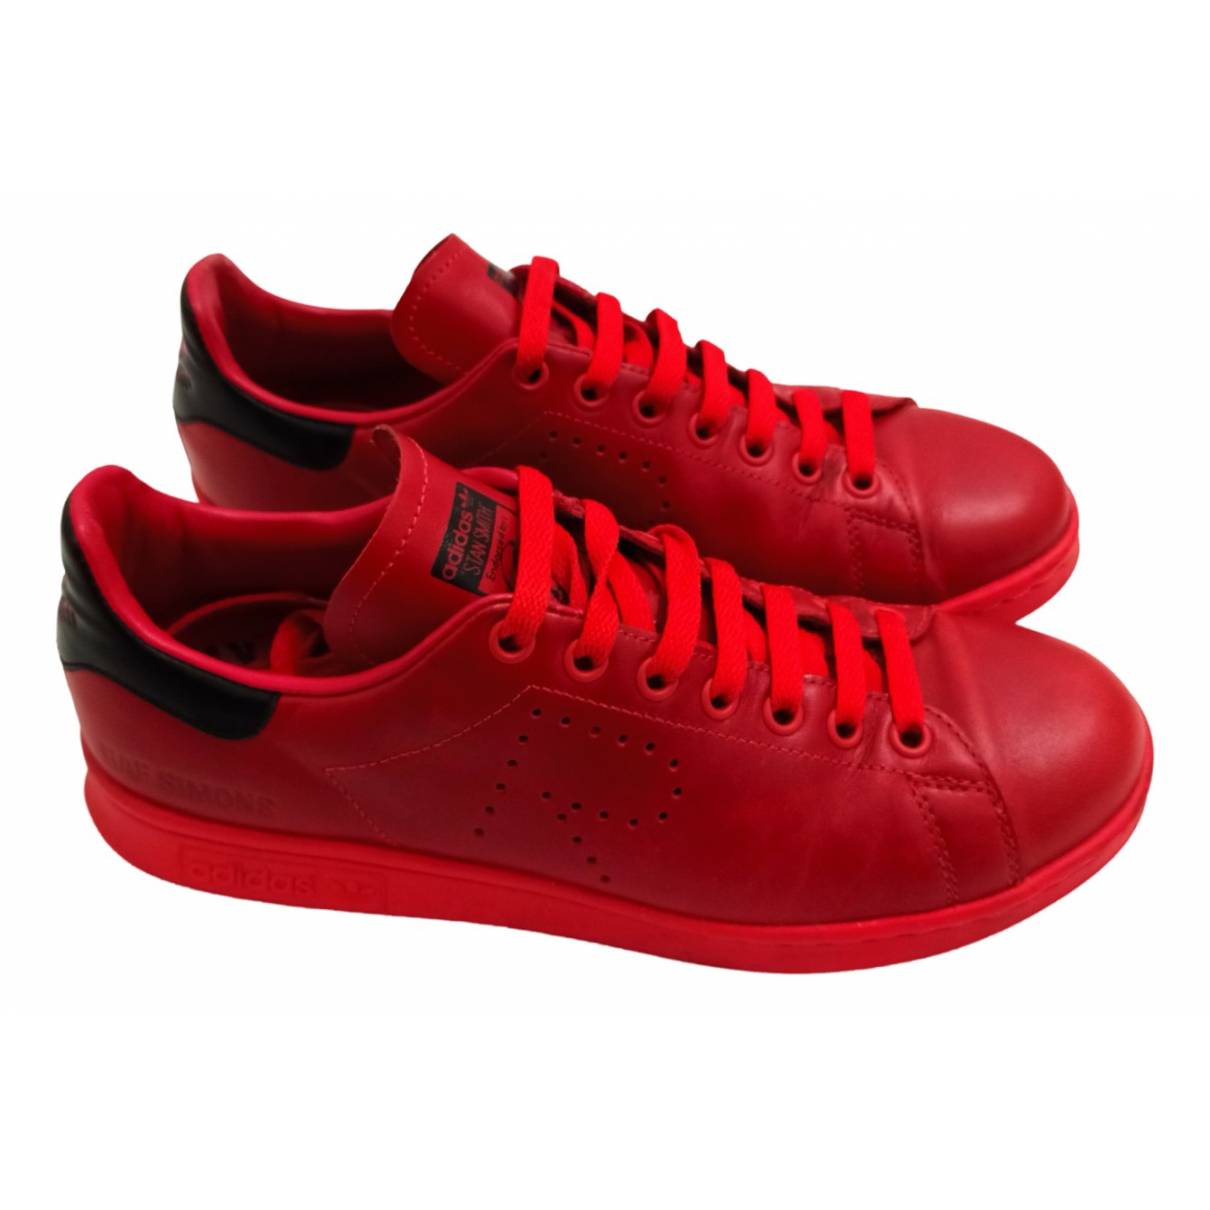 Stan smith leather trainers Adidas x Raf Simons Red 7.5 in Leather - 18619755